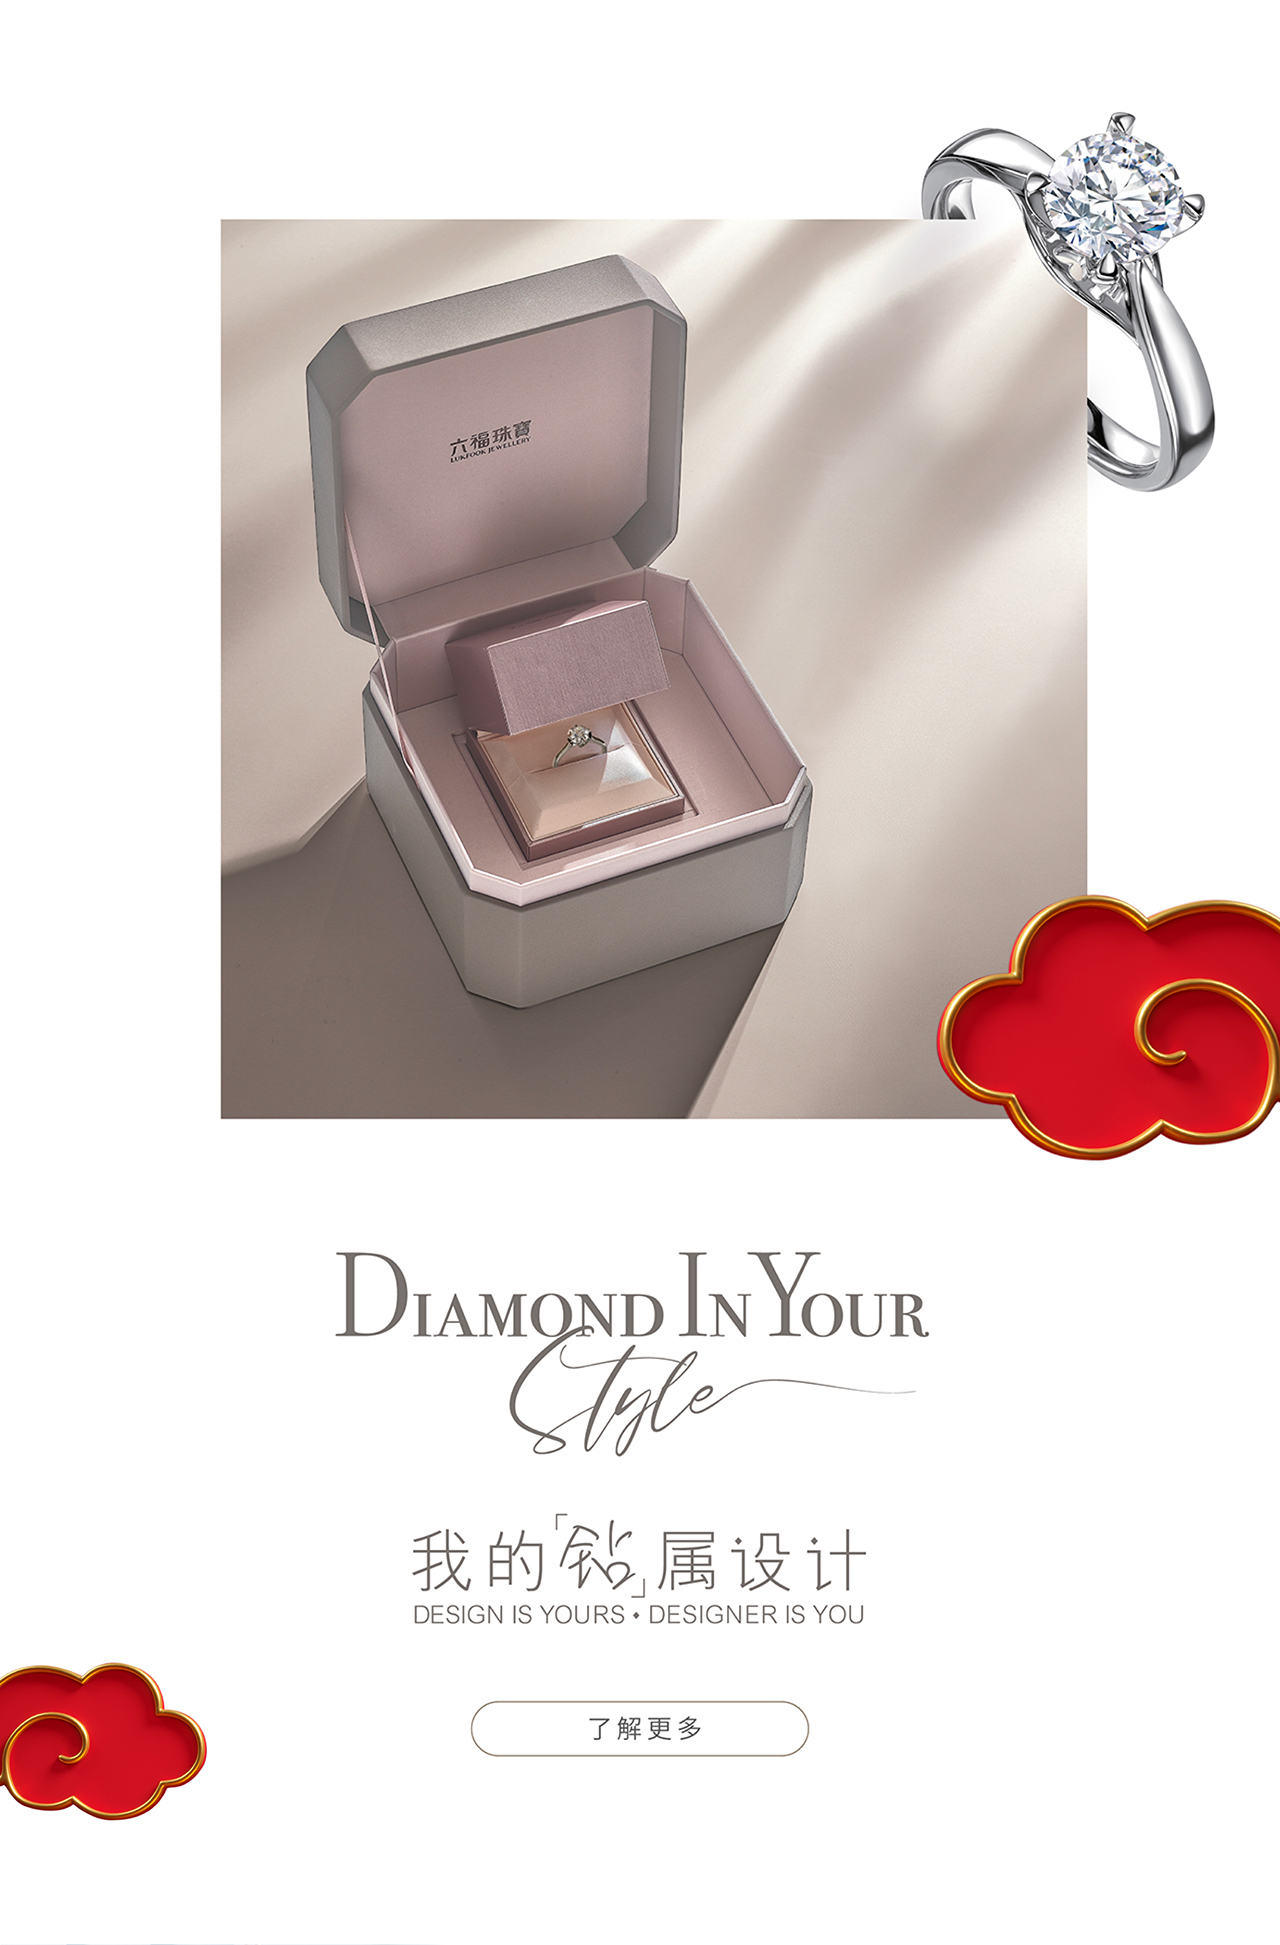 Diamond In Your Style | 钻石首饰